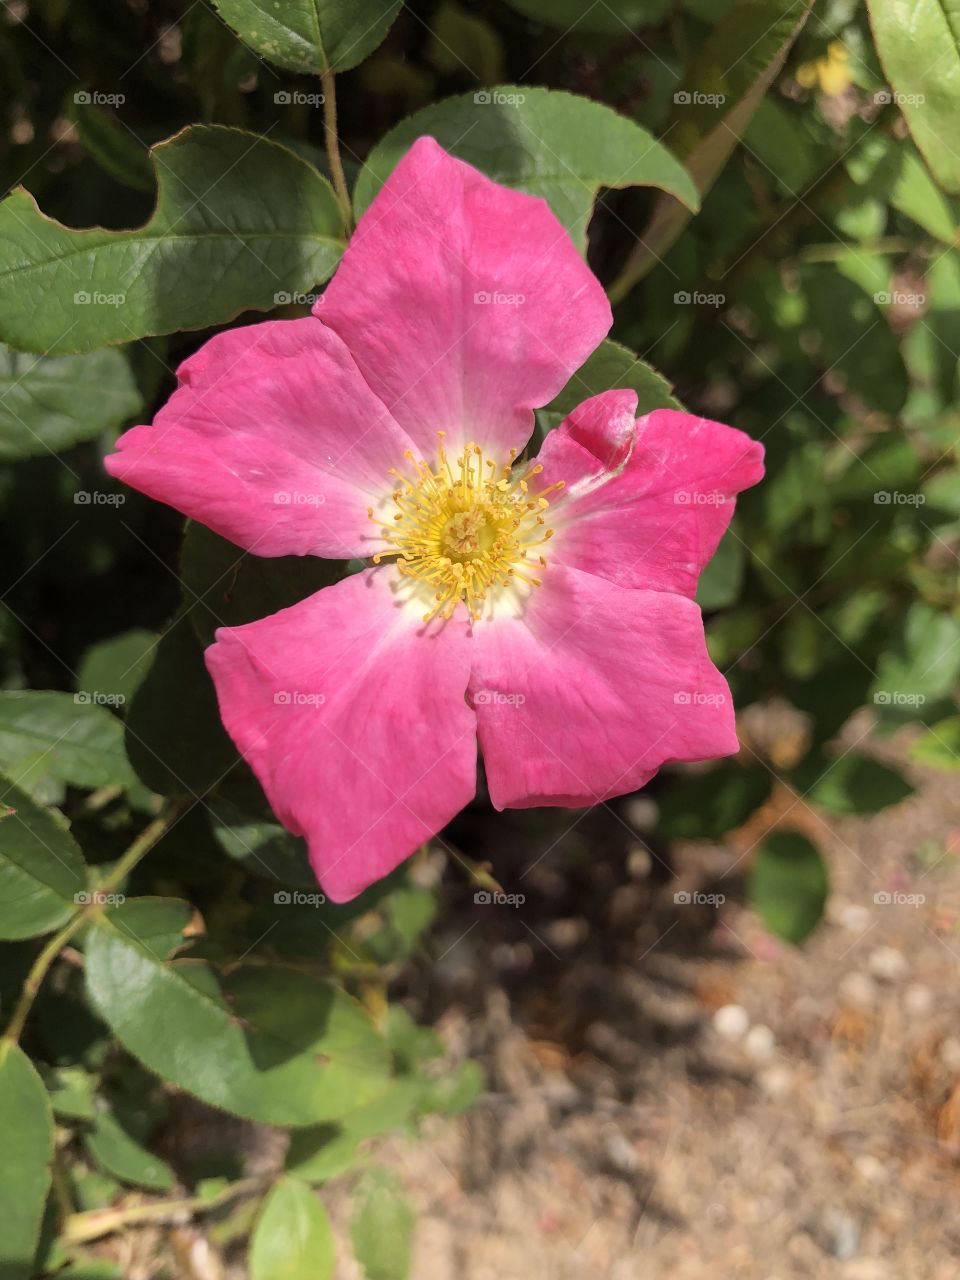 Beautiful day with bright and colorful summer bloom of a bright pink flower surrounded by green grass. Photos can be used for interior design. These were taken on iPhone 8